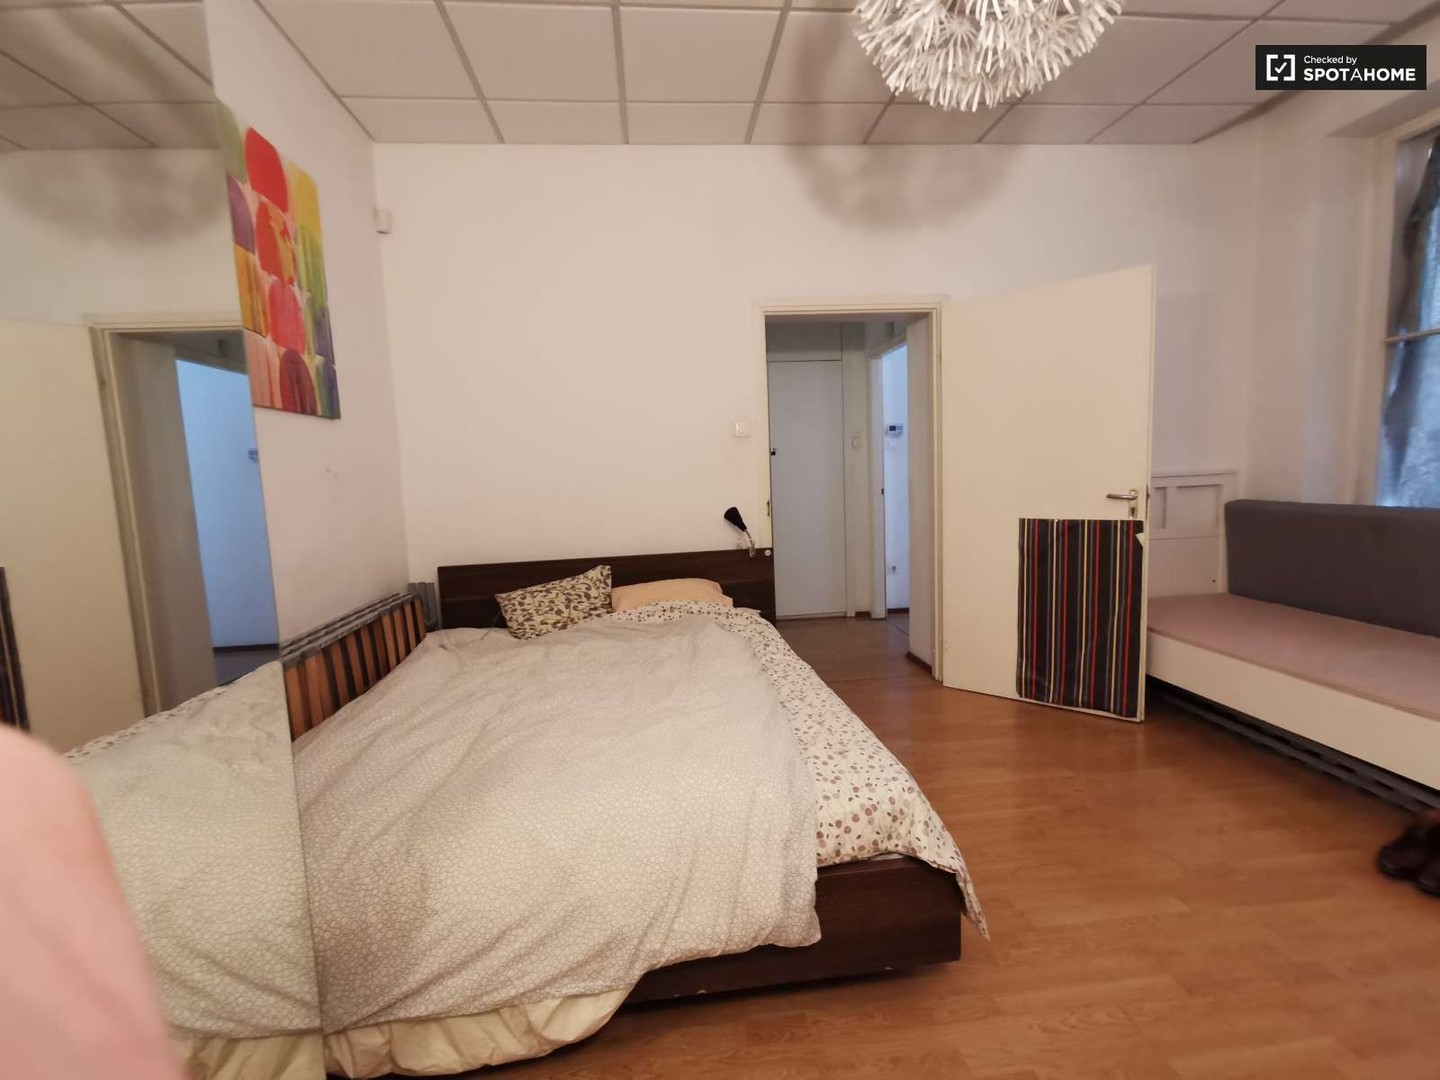 Room for rent with double bed budapest